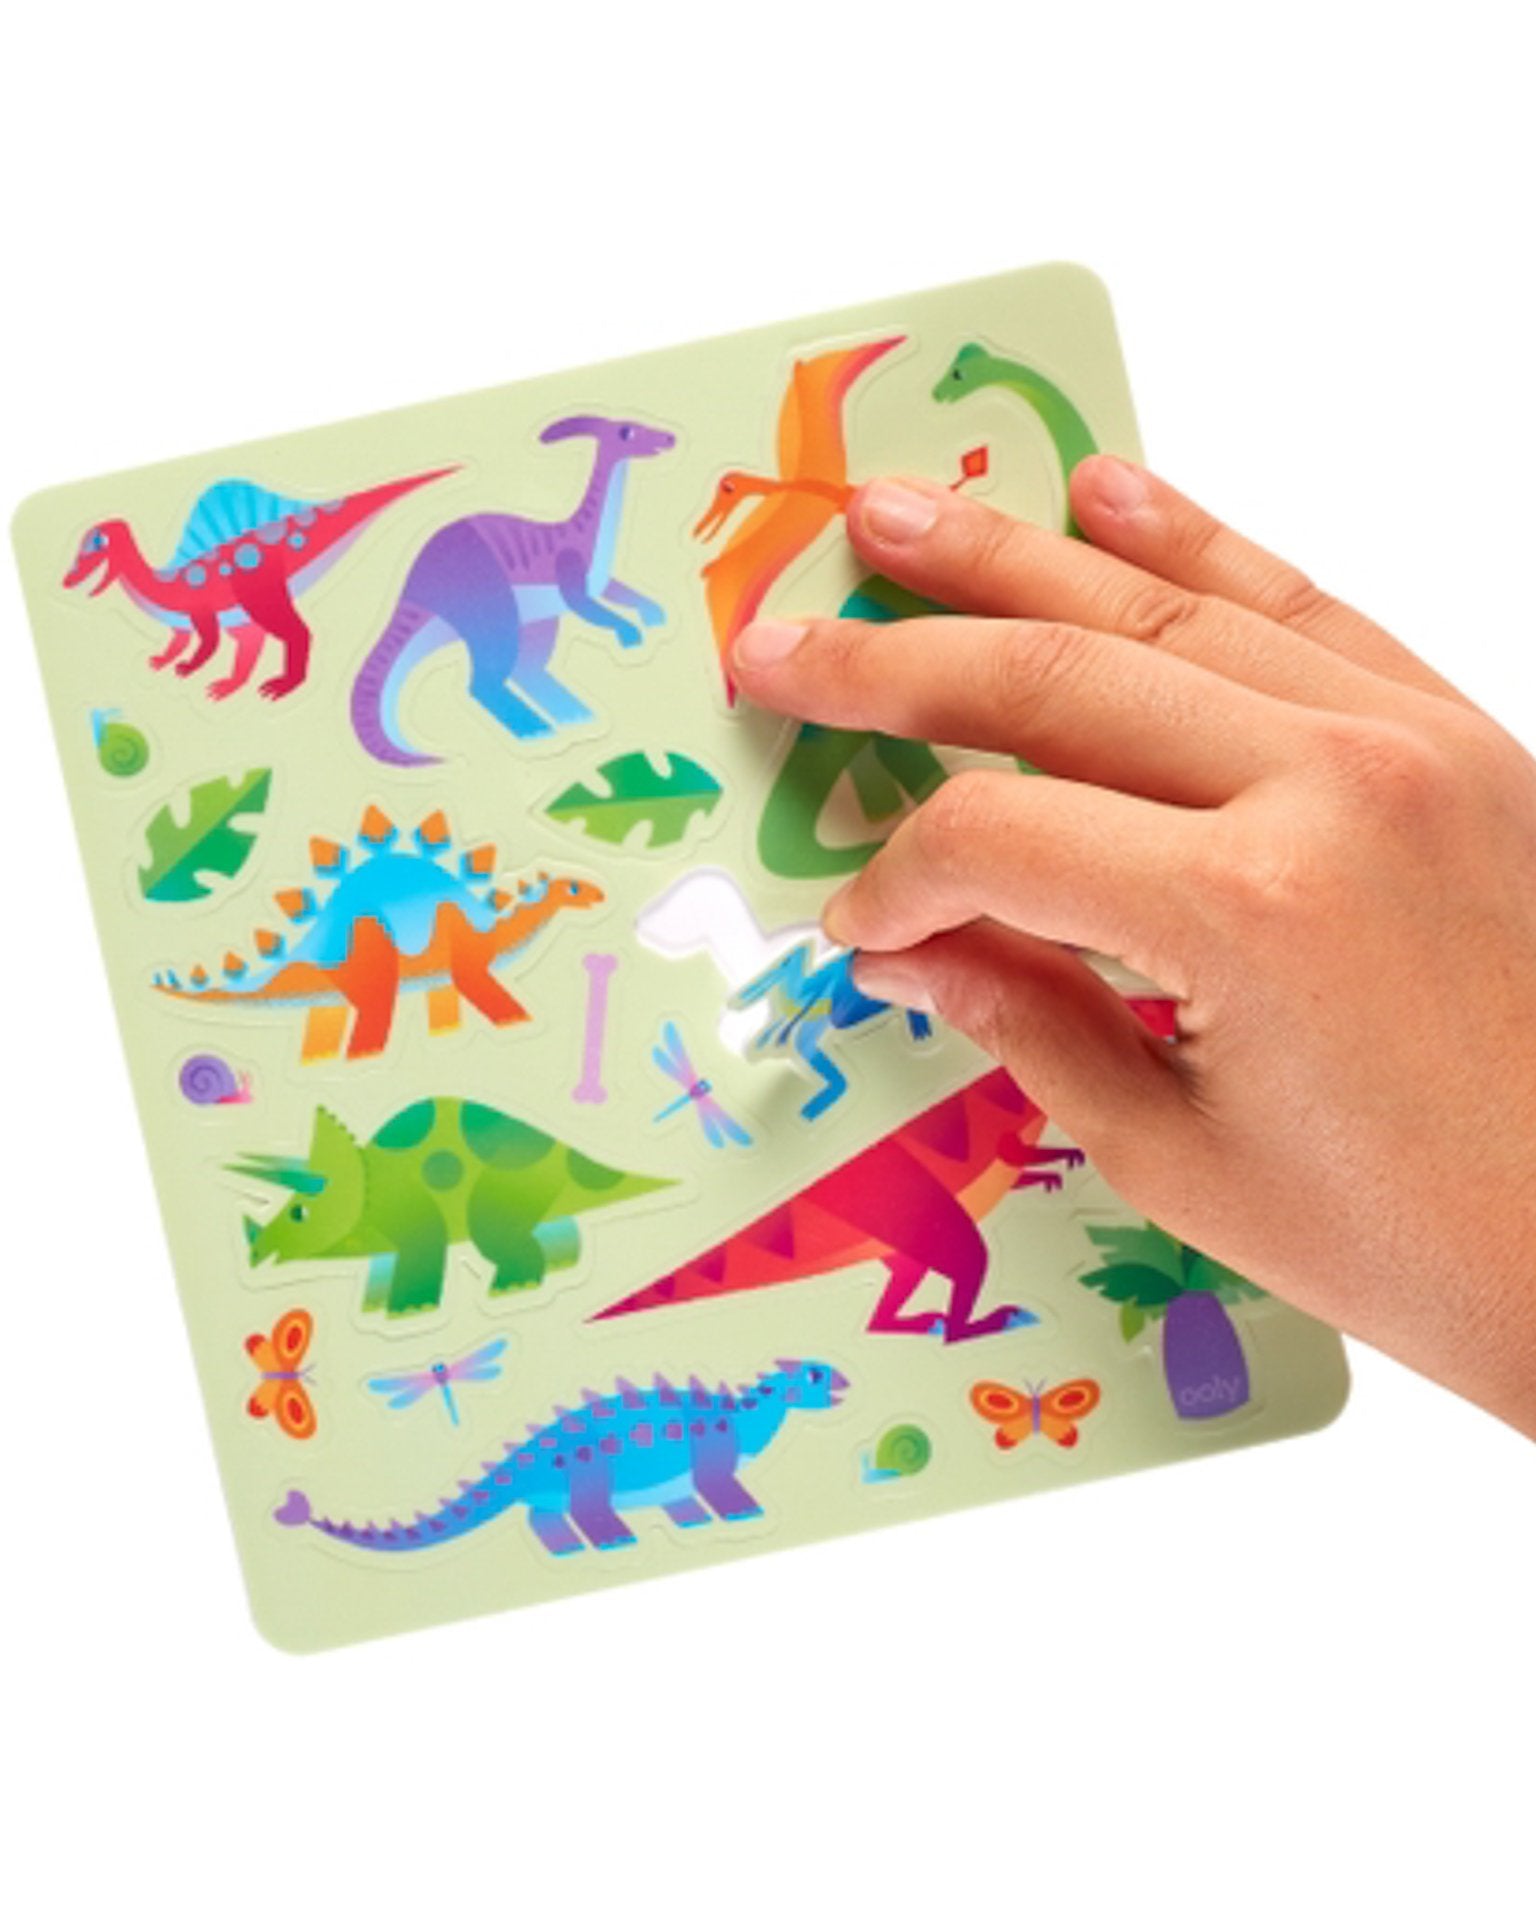 Little ooly play play again! mini activity kit - daring dinos